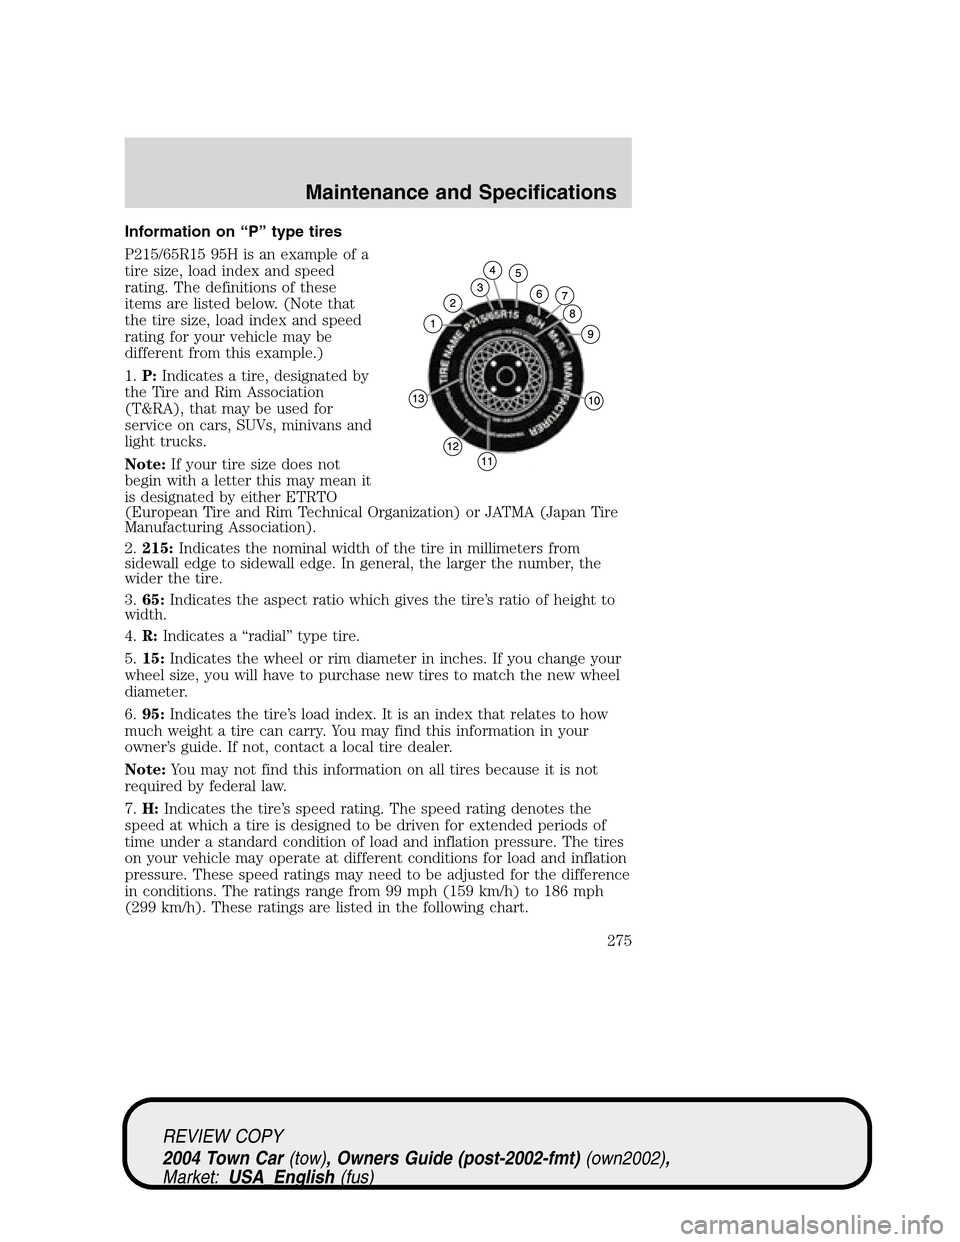 LINCOLN TOWN CAR 2004  Owners Manual Information on“P”type tires
P215/65R15 95H is an example of a
tire size, load index and speed
rating. The definitions of these
items are listed below. (Note that
the tire size, load index and spee